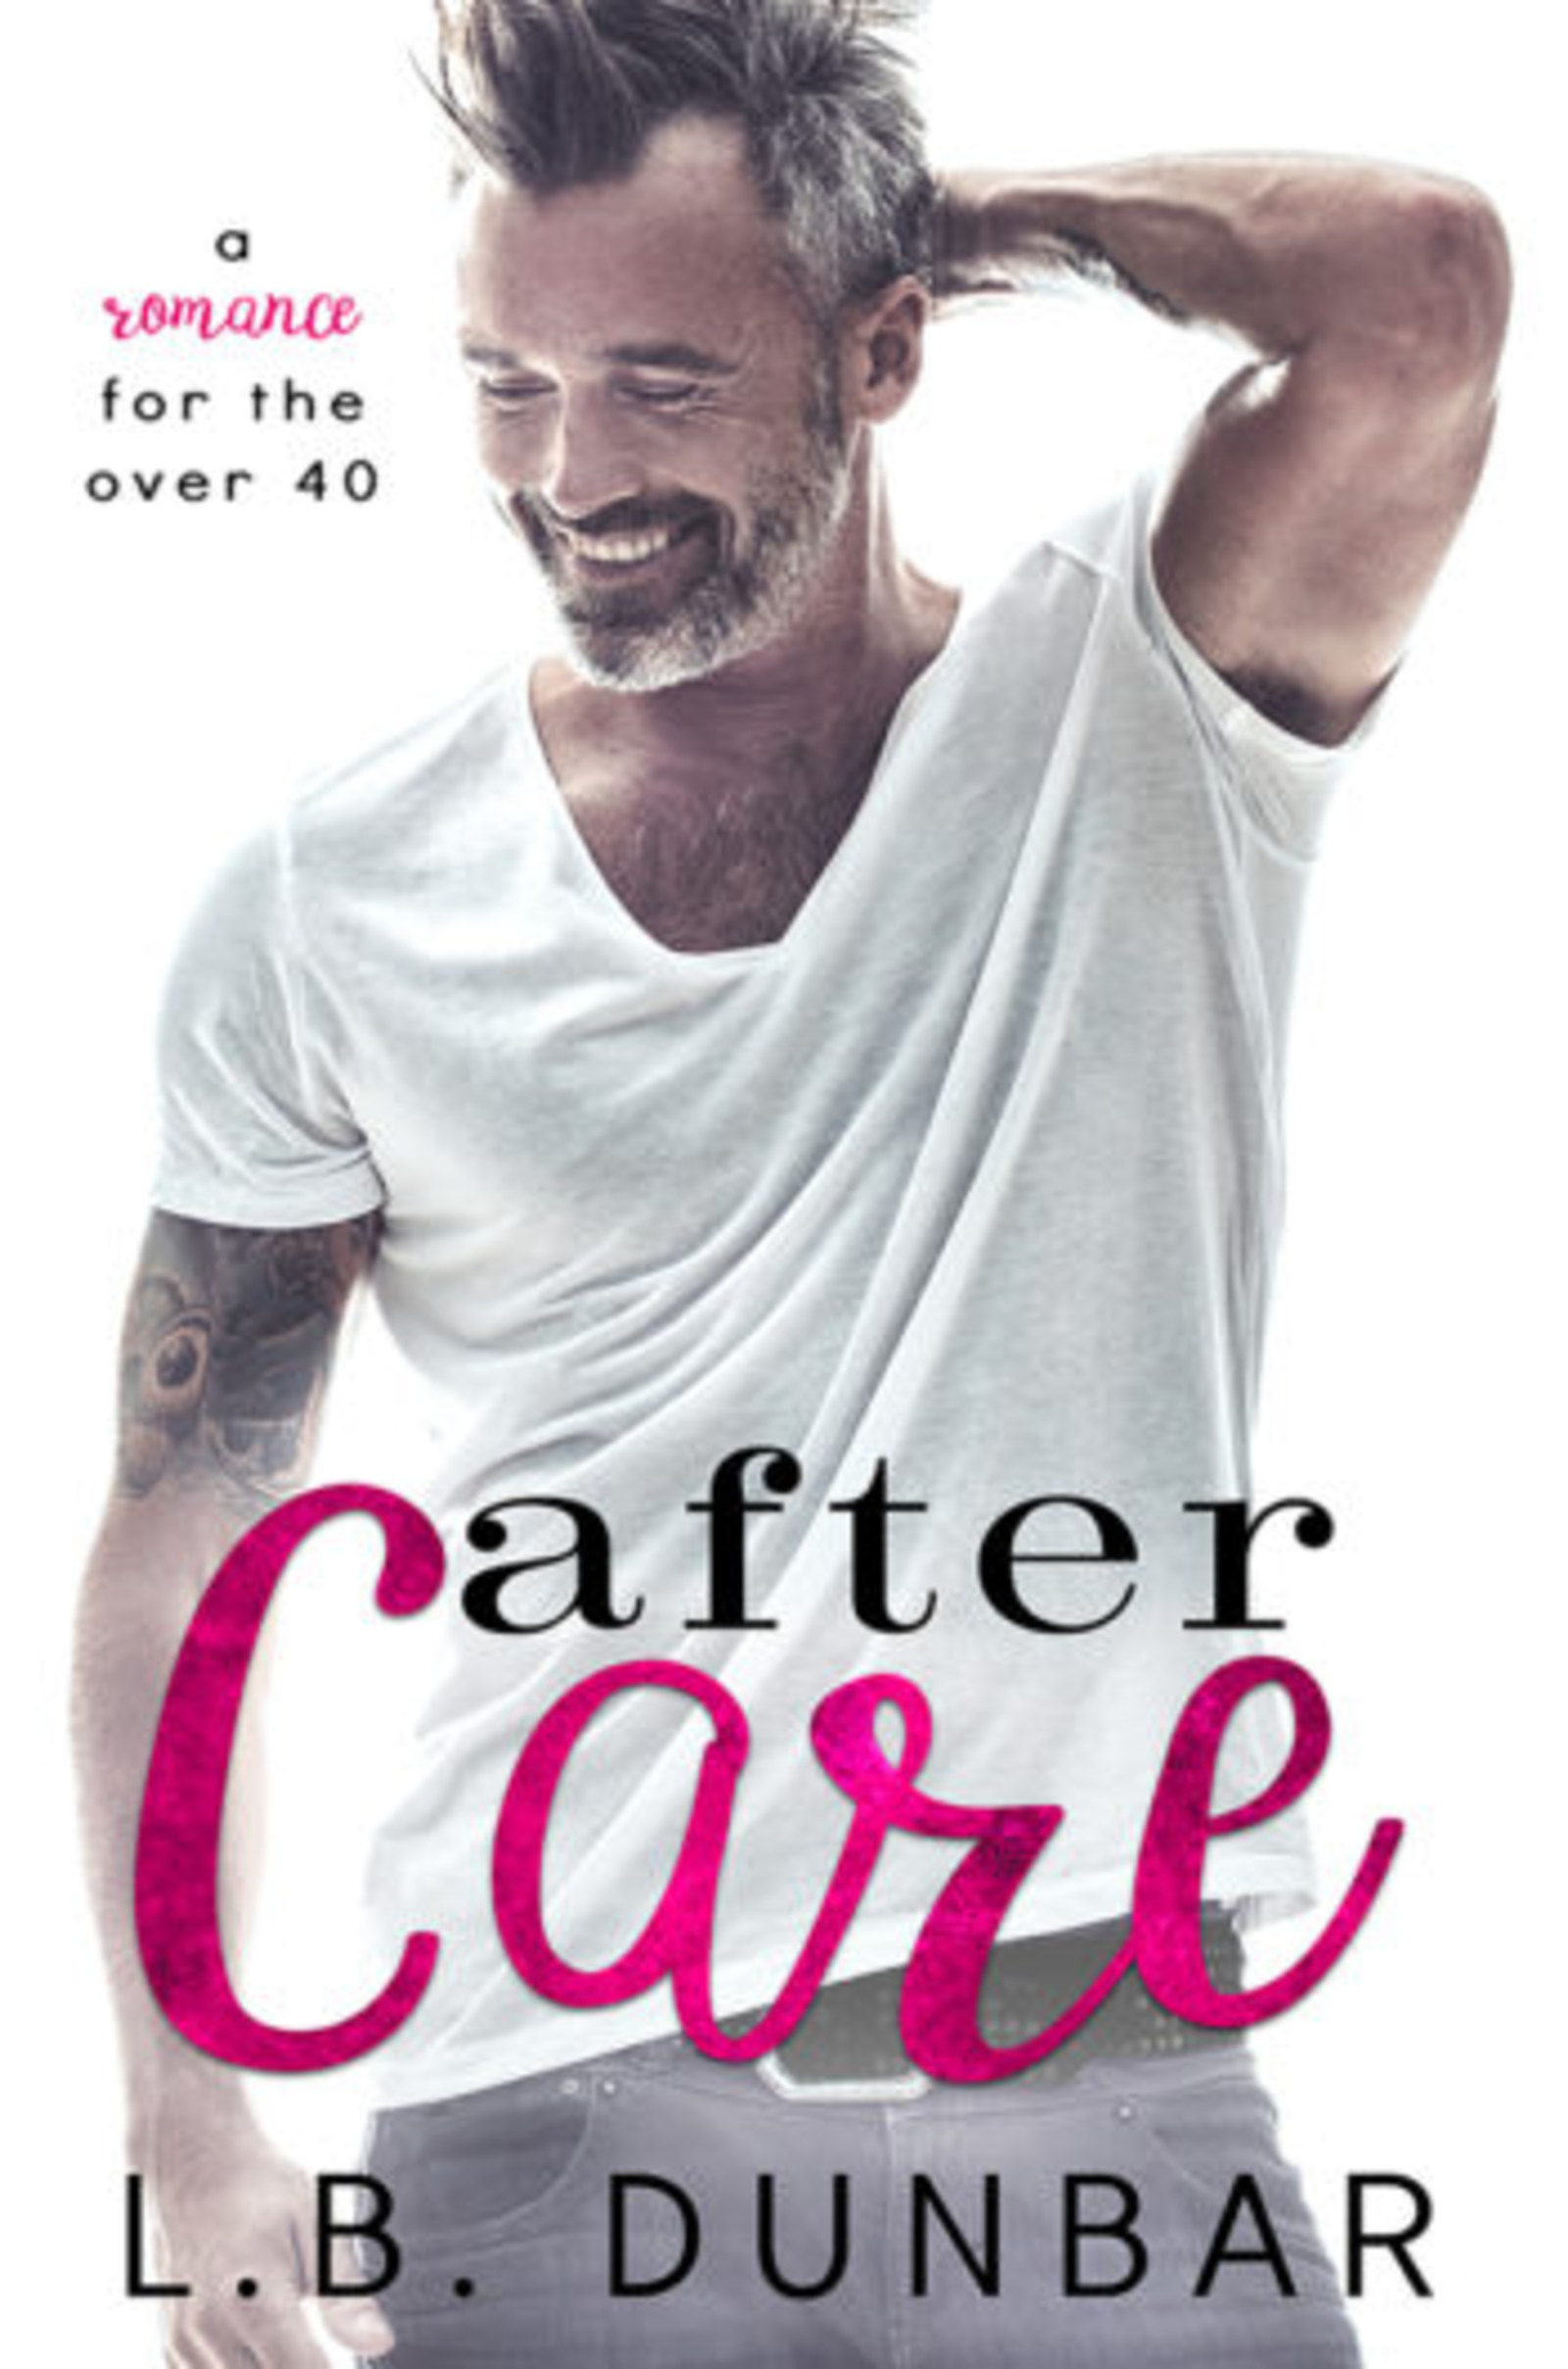 Book Cover of After Care by L.B. Dunbar